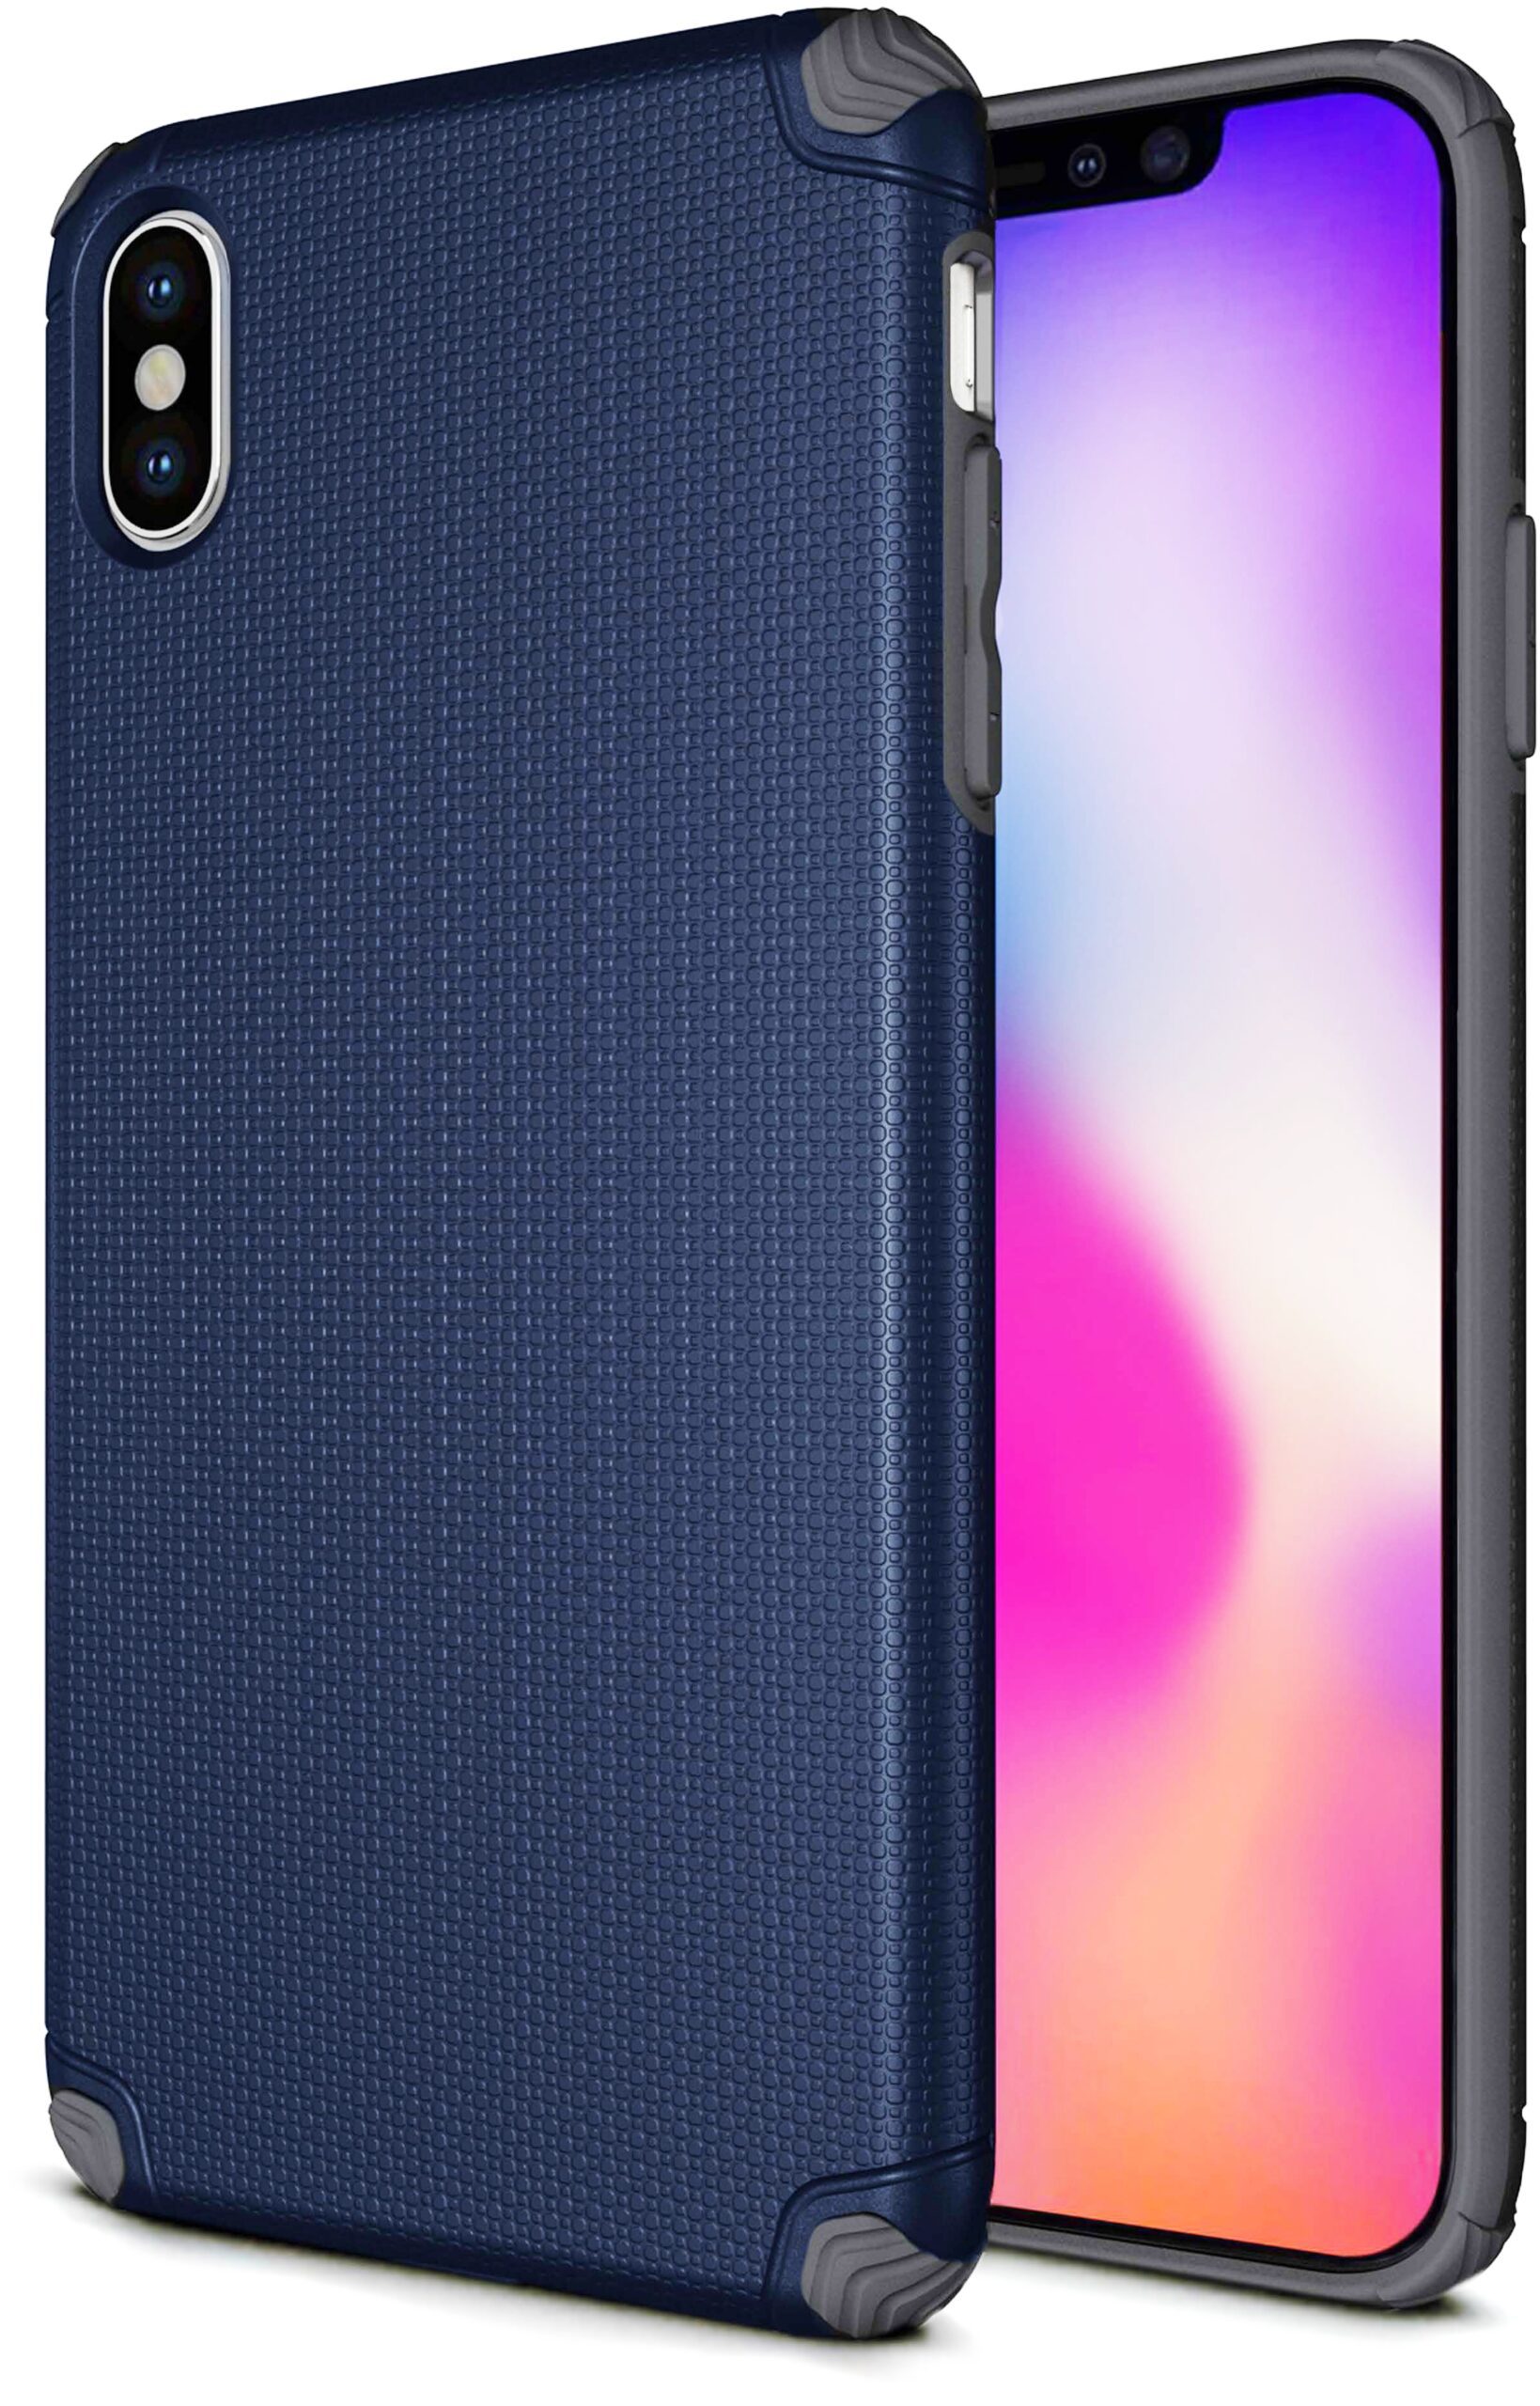 Base ProTech - Rugged Armor Protective Case for iPhone X Max - Blue